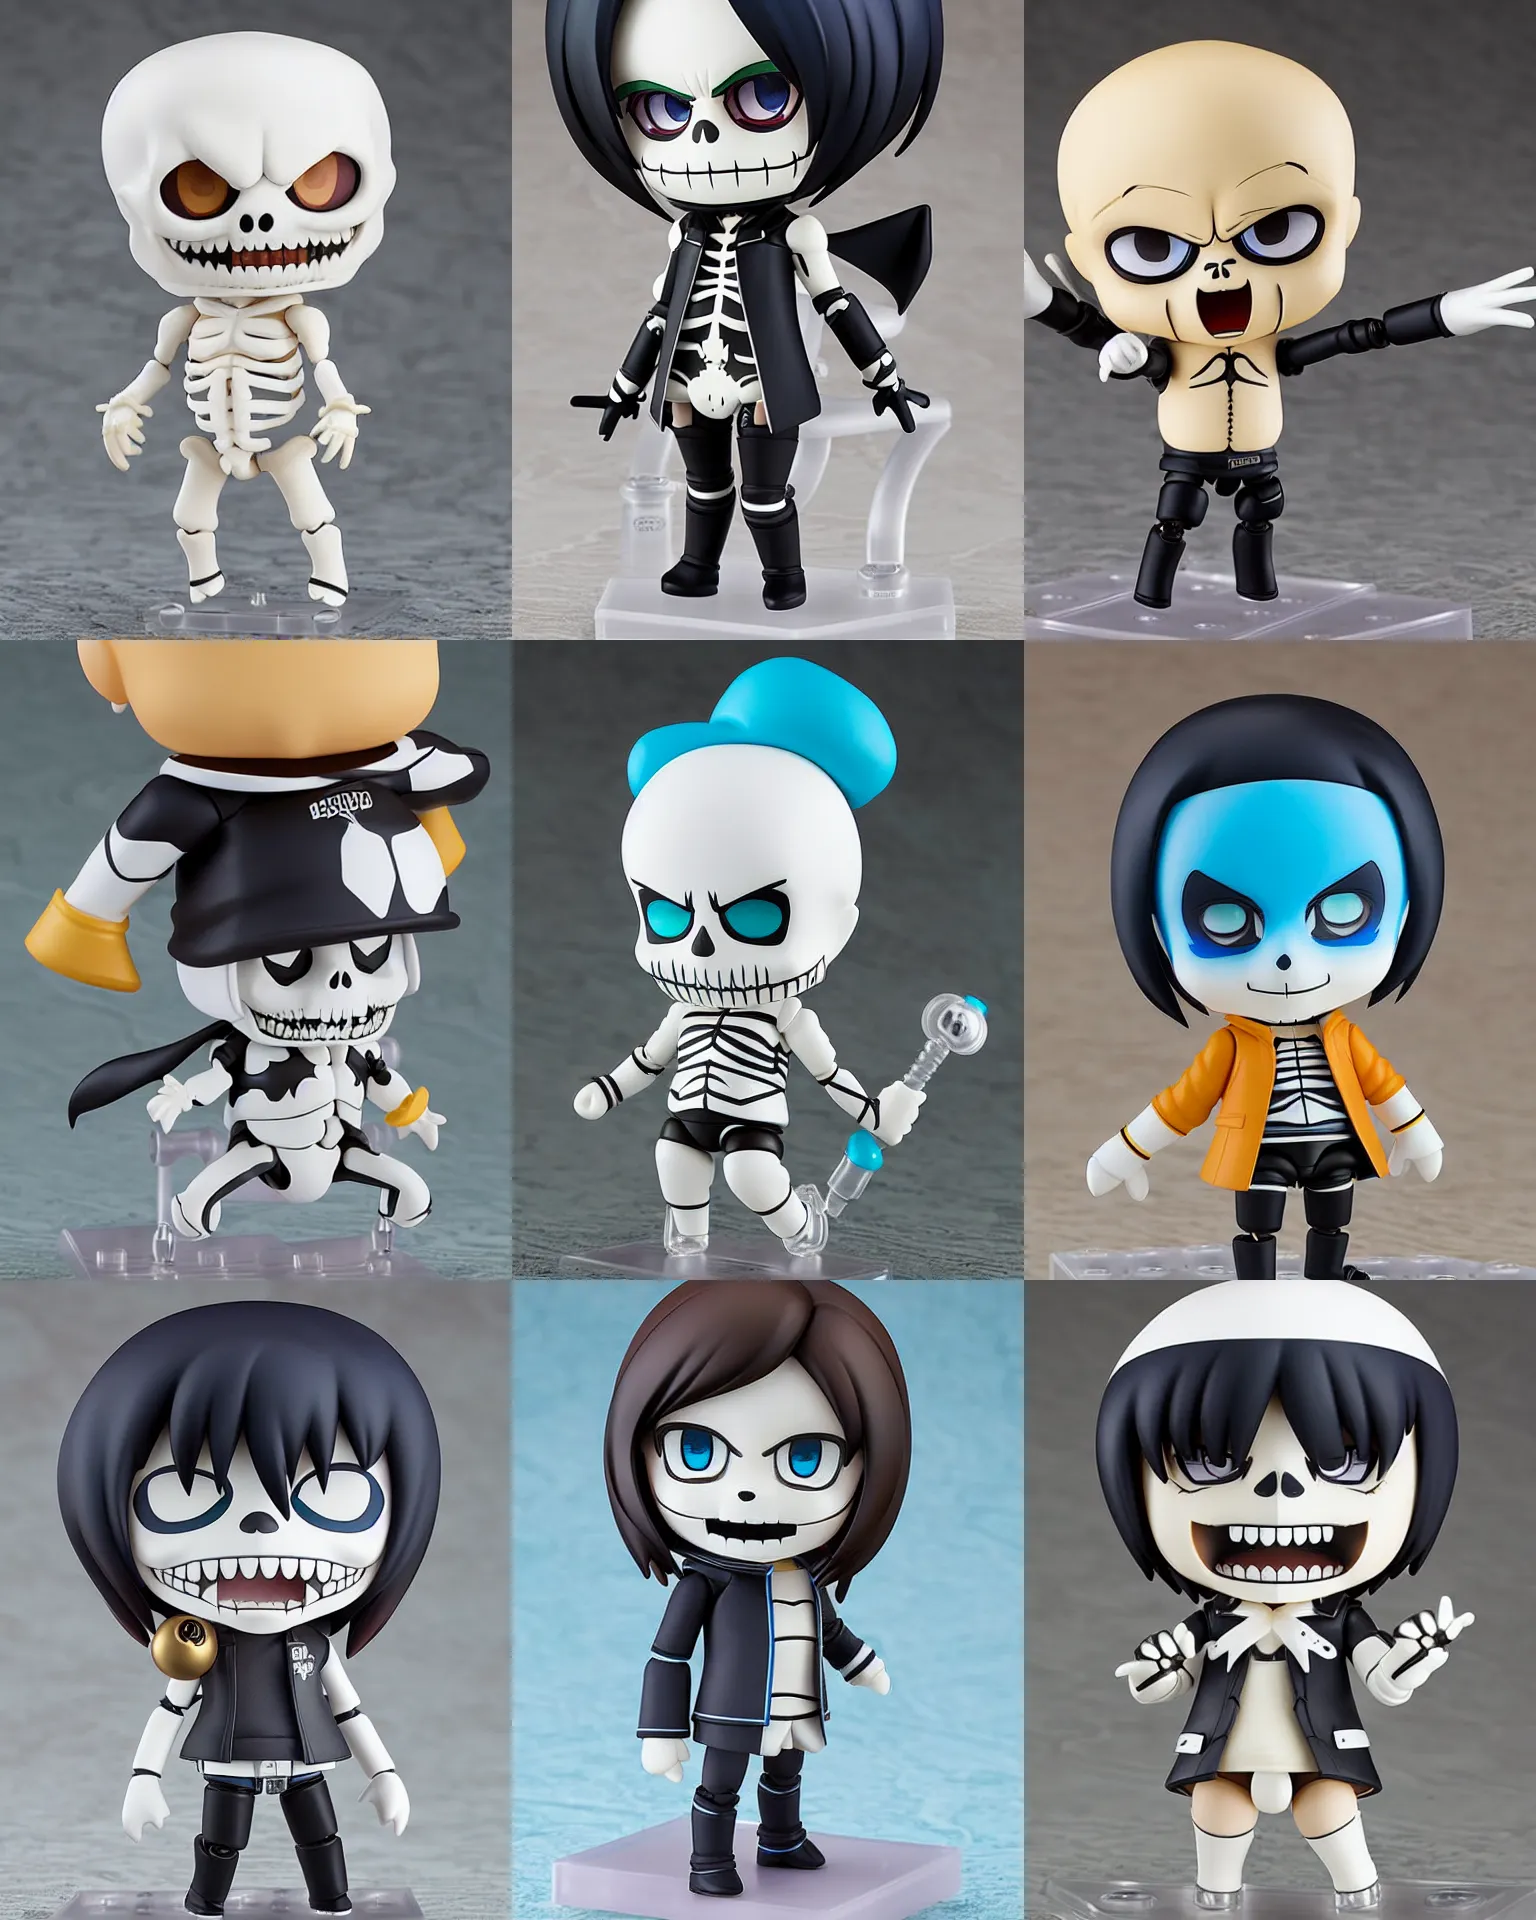 Prompt: a nendoroid of sans the skeleton, detailed product photo